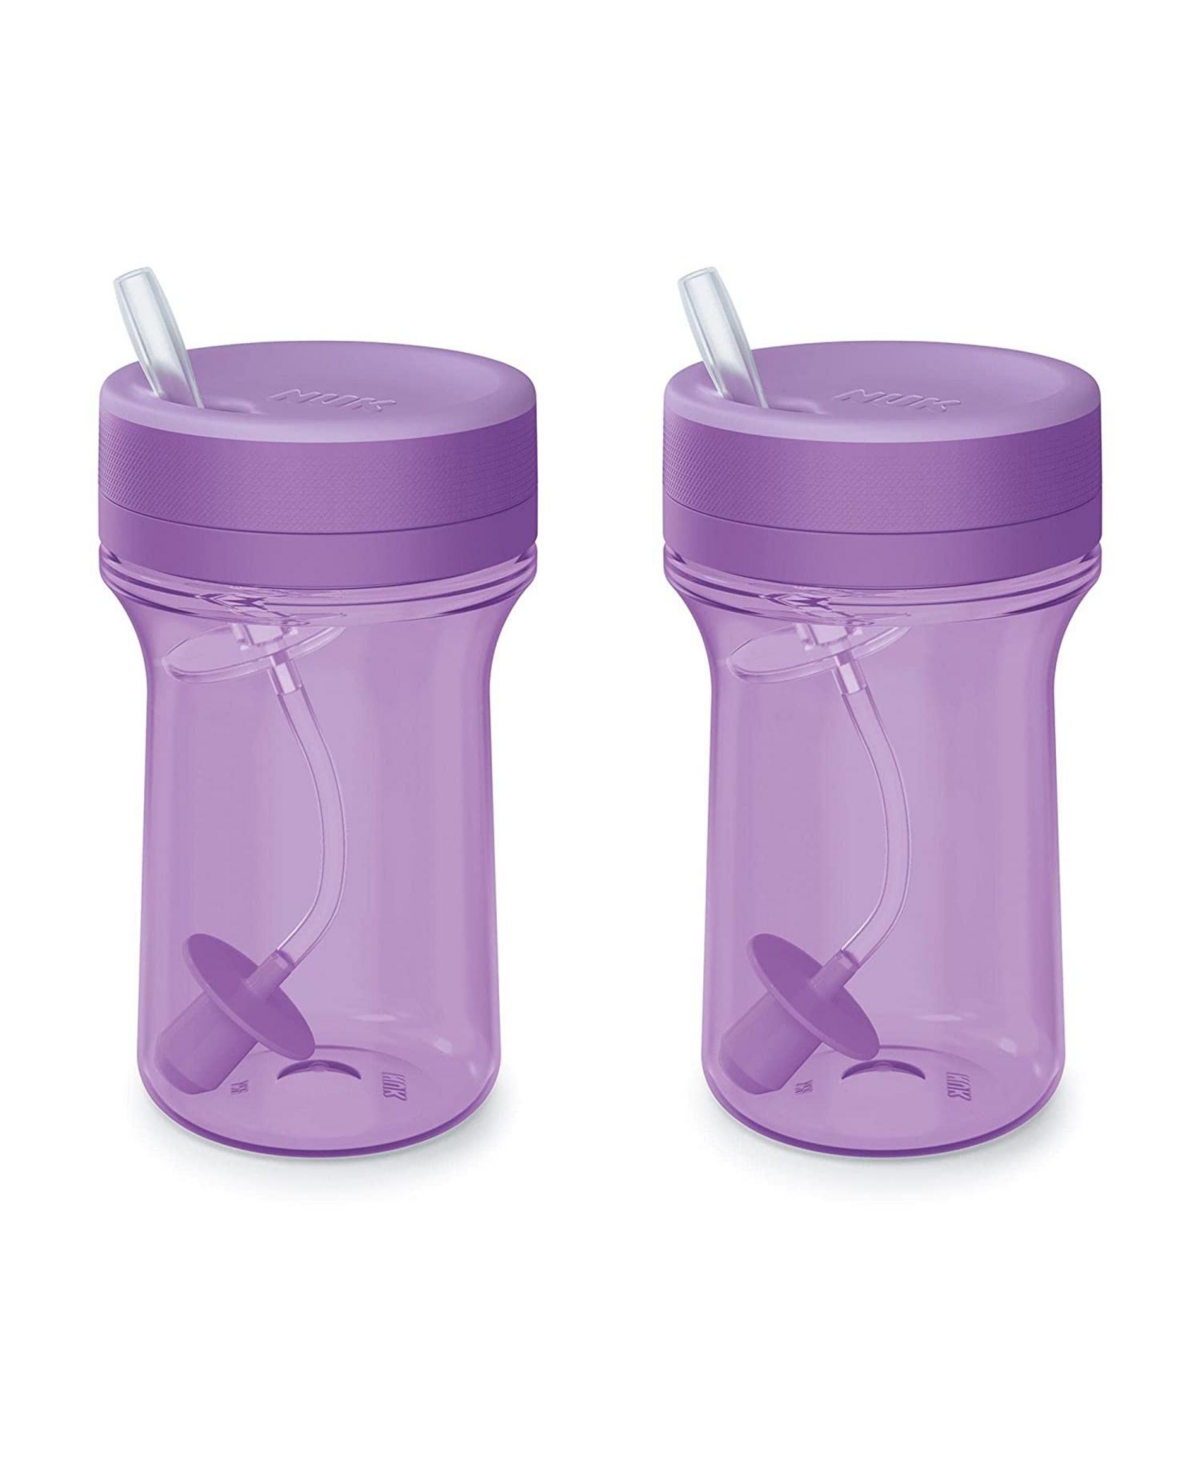 Nuk Everlast Leakproof Weighted Straw Cup, 10 Oz, 2 Pack, Purple